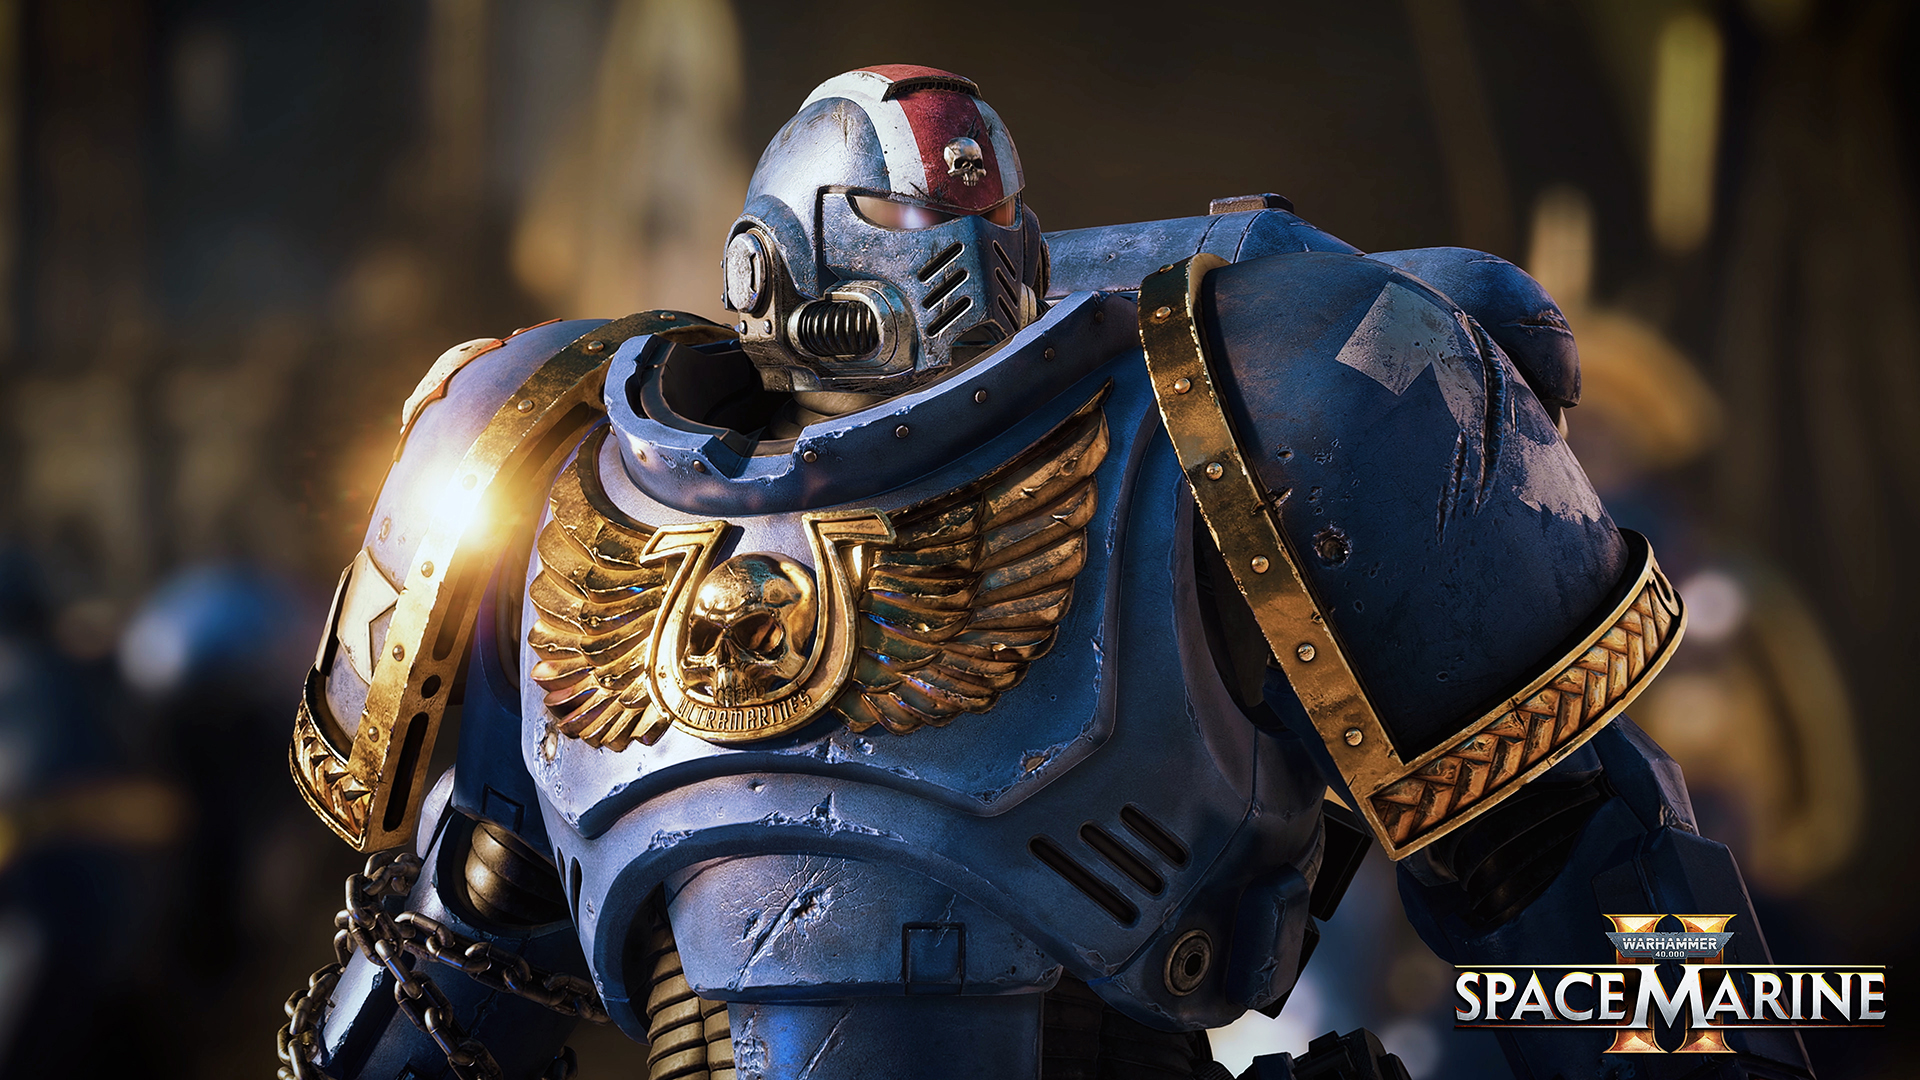 HD Wallpaper of Warhammer 40K: Space Marine 2 featuring a detailed Space Marine in armor with game logo